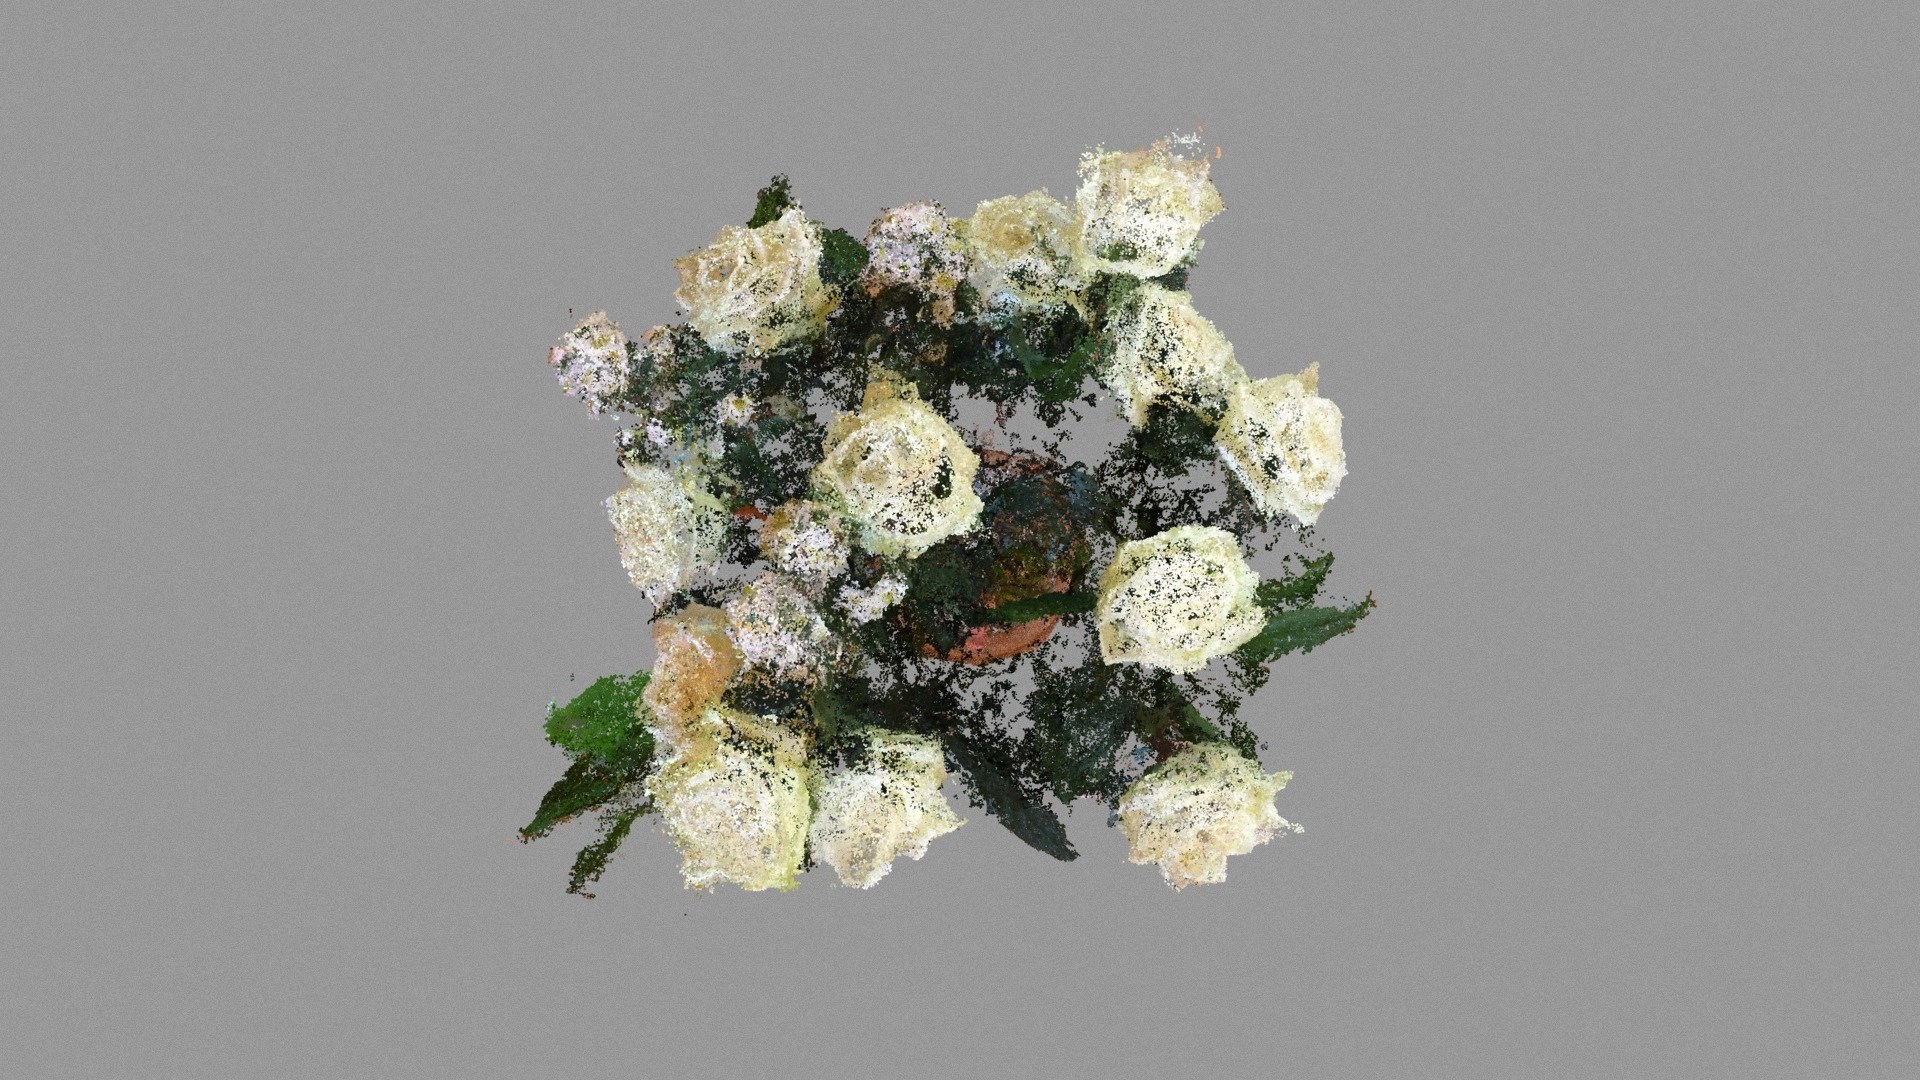 A point cloud of roses